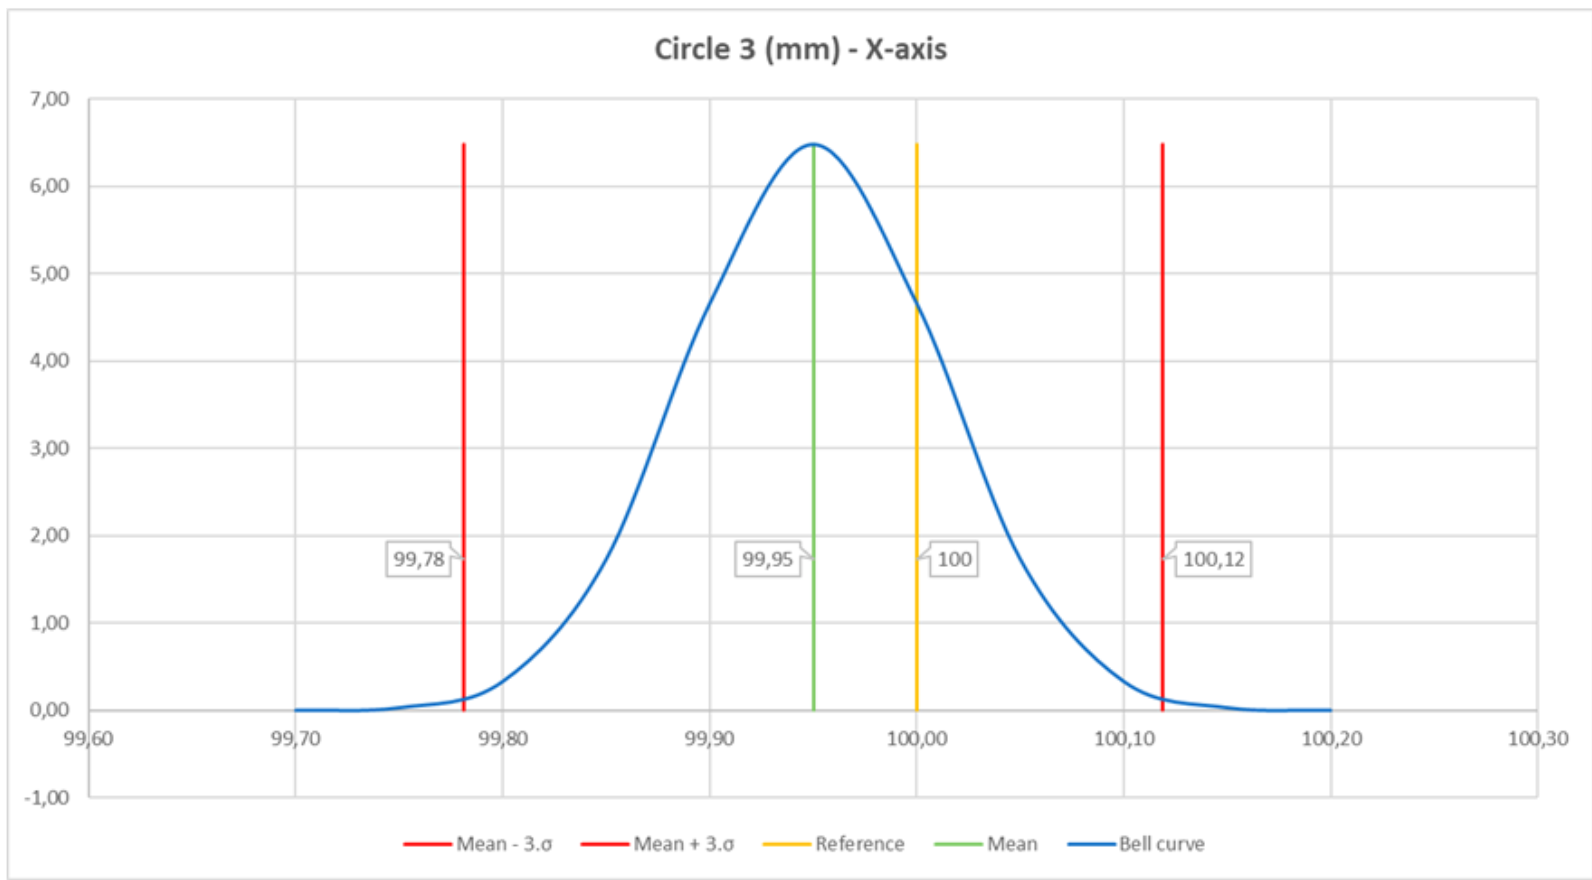 Bell curves - Circle three for the X-axis and Circle two for the Y-axis. Images by 3D Printing Industry.